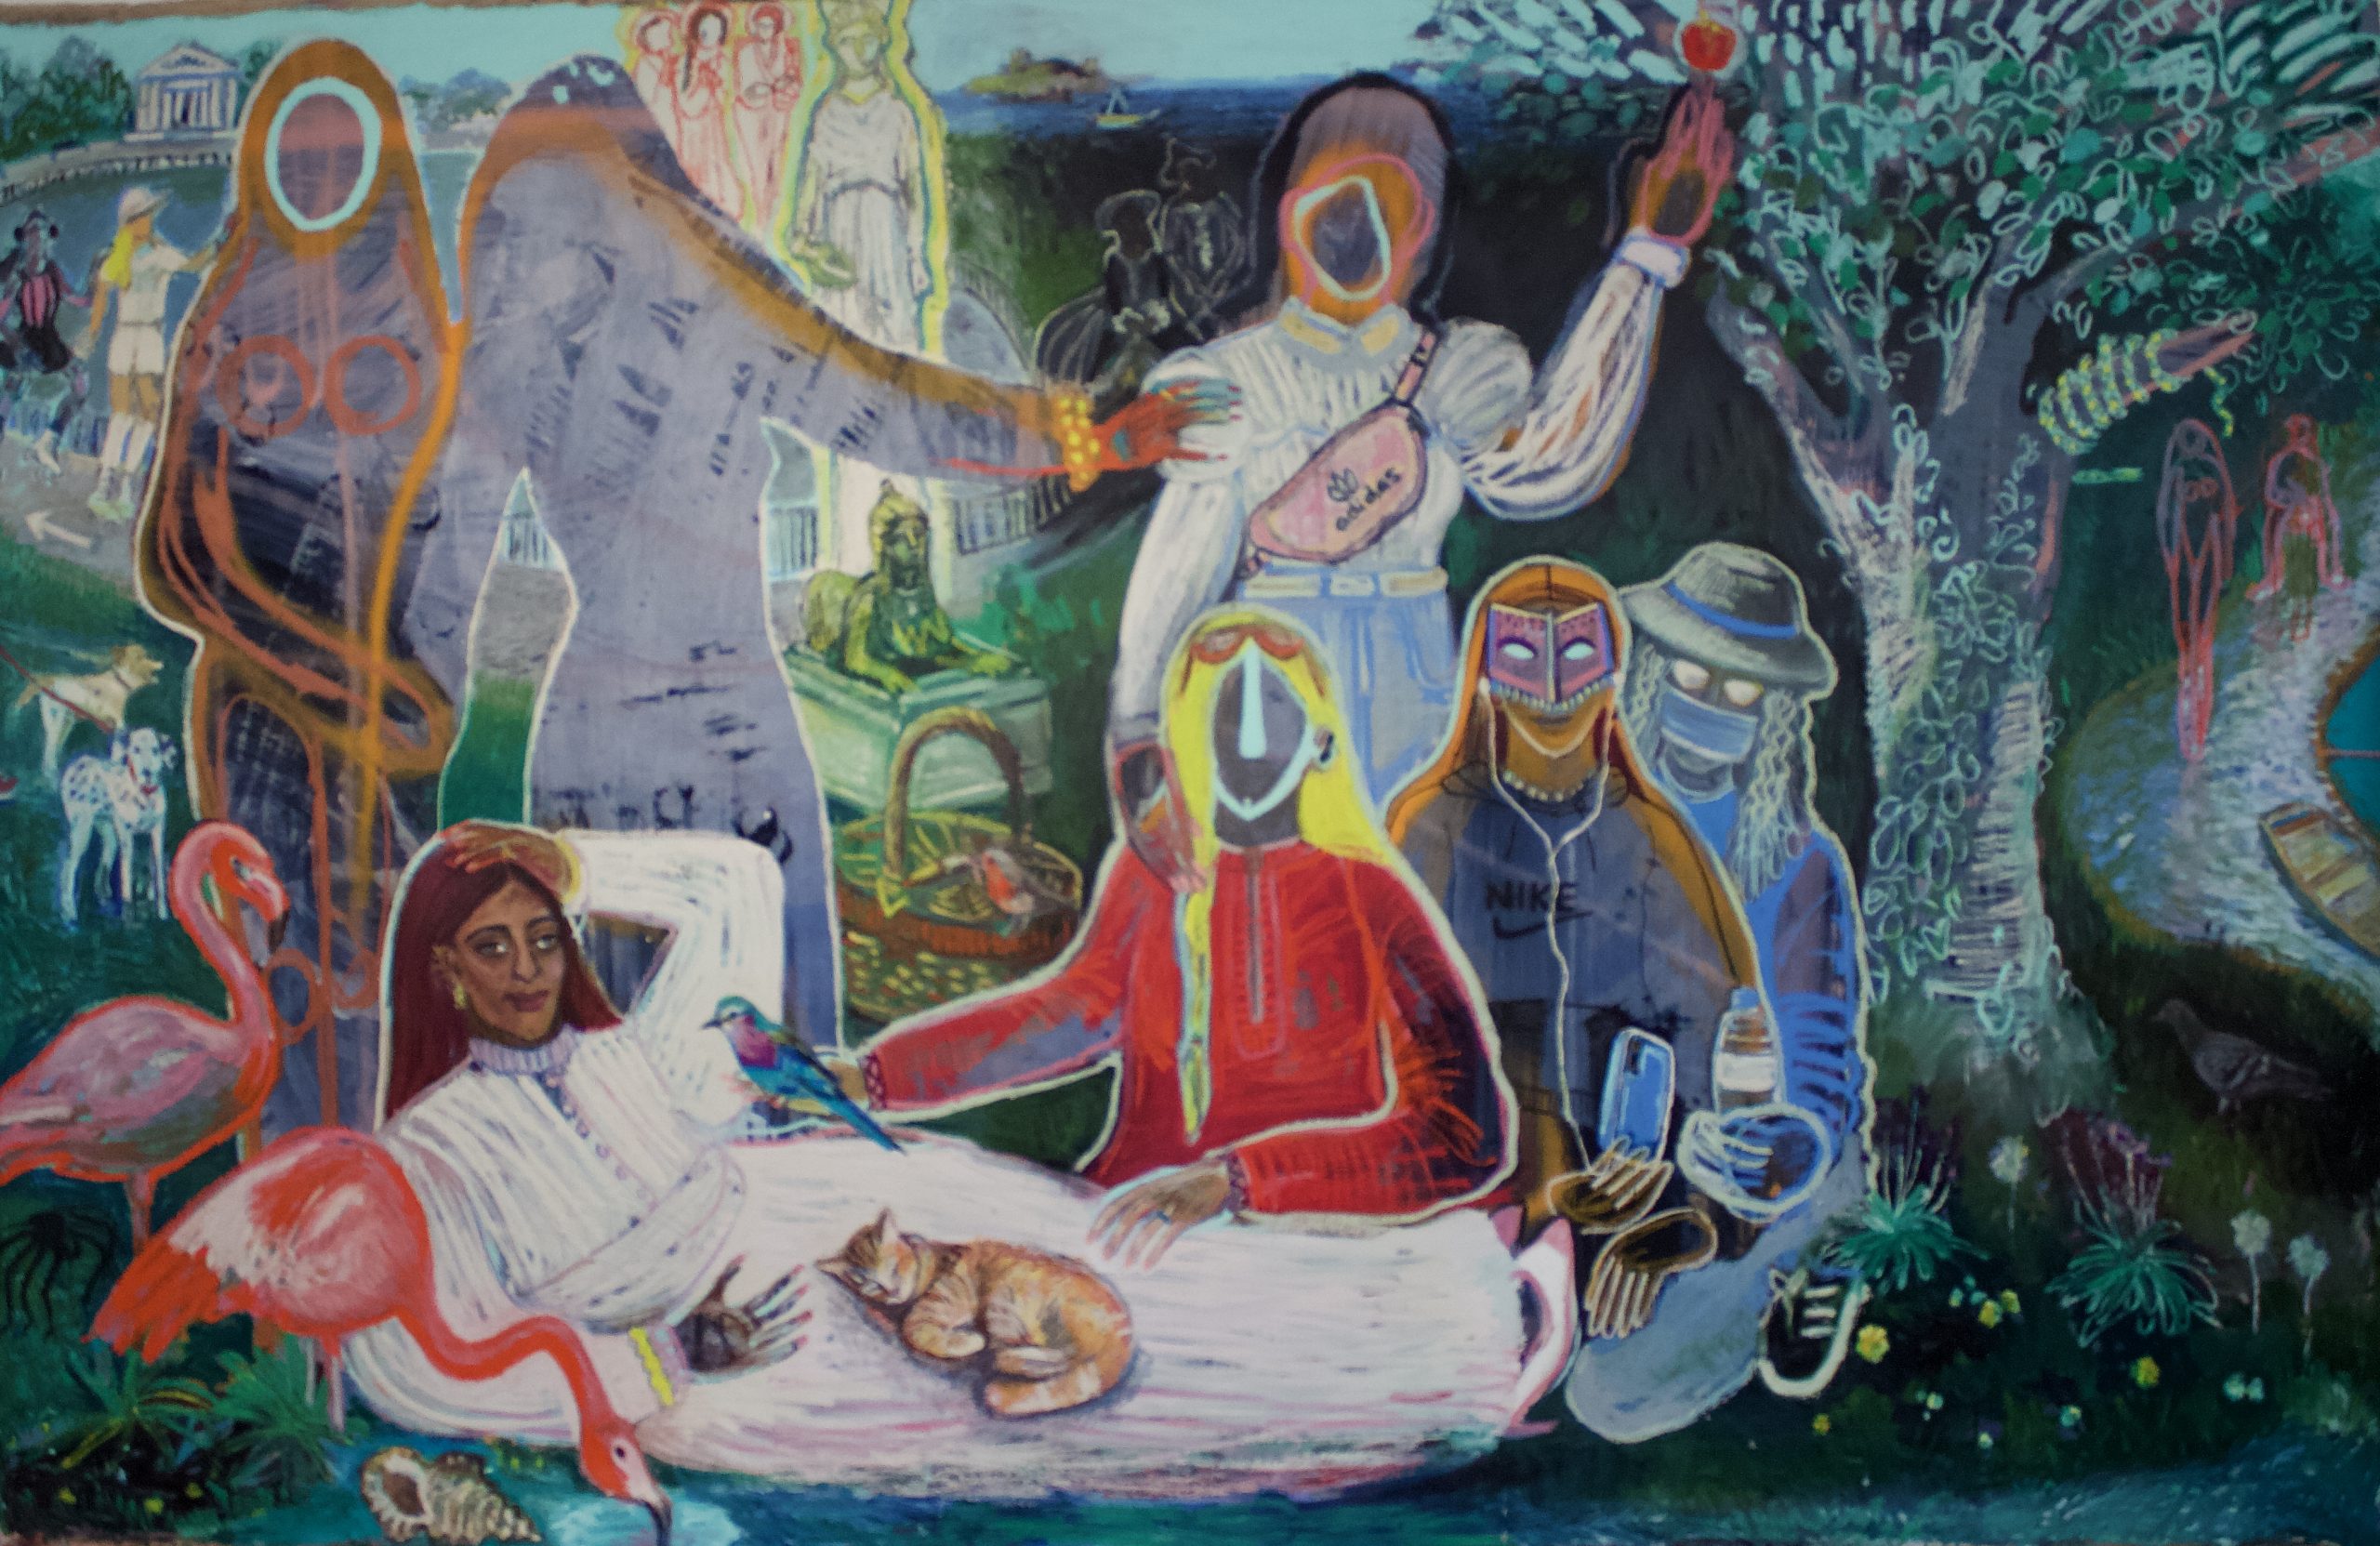 Painting of women in the garden, inspired by garden of Eden. There are & women in different clothing and silhouettes, traditional Middle-Eastern clothes paired with contemporary fashion, with two pink flamingos, a cat, and two dogs in the background.